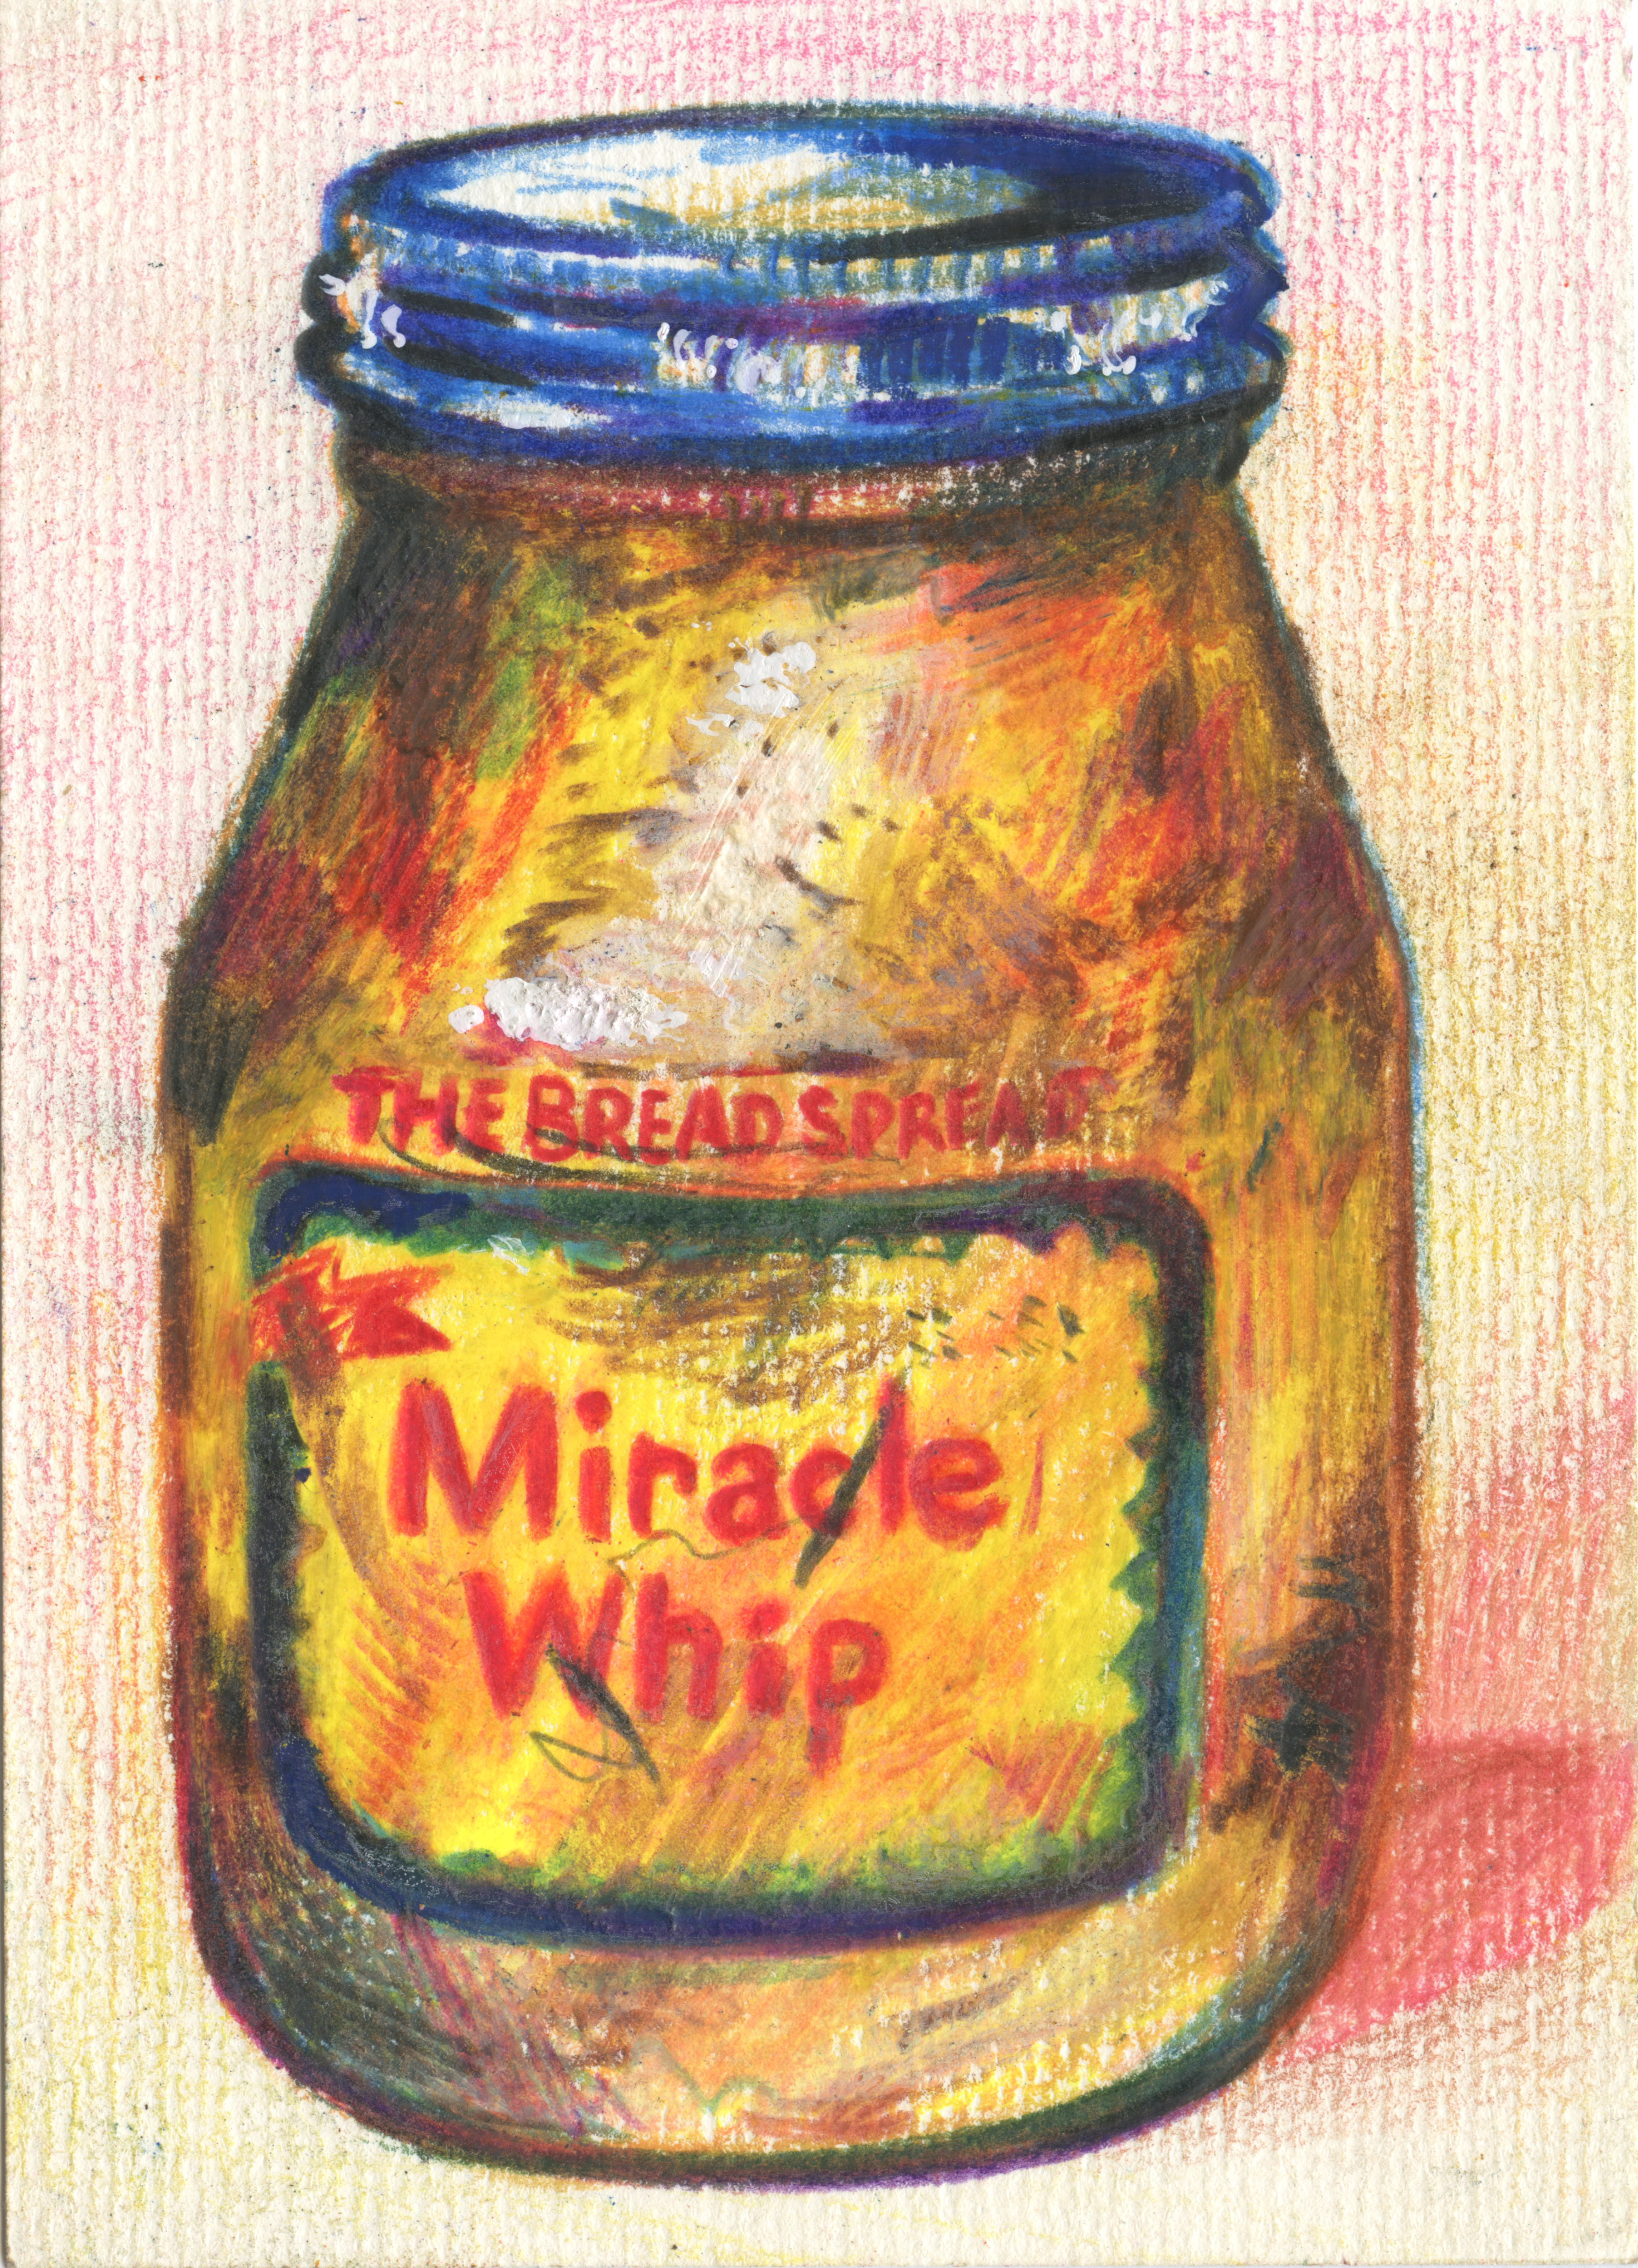 PAUL MCCARTHY MIRACLE WHIP - front